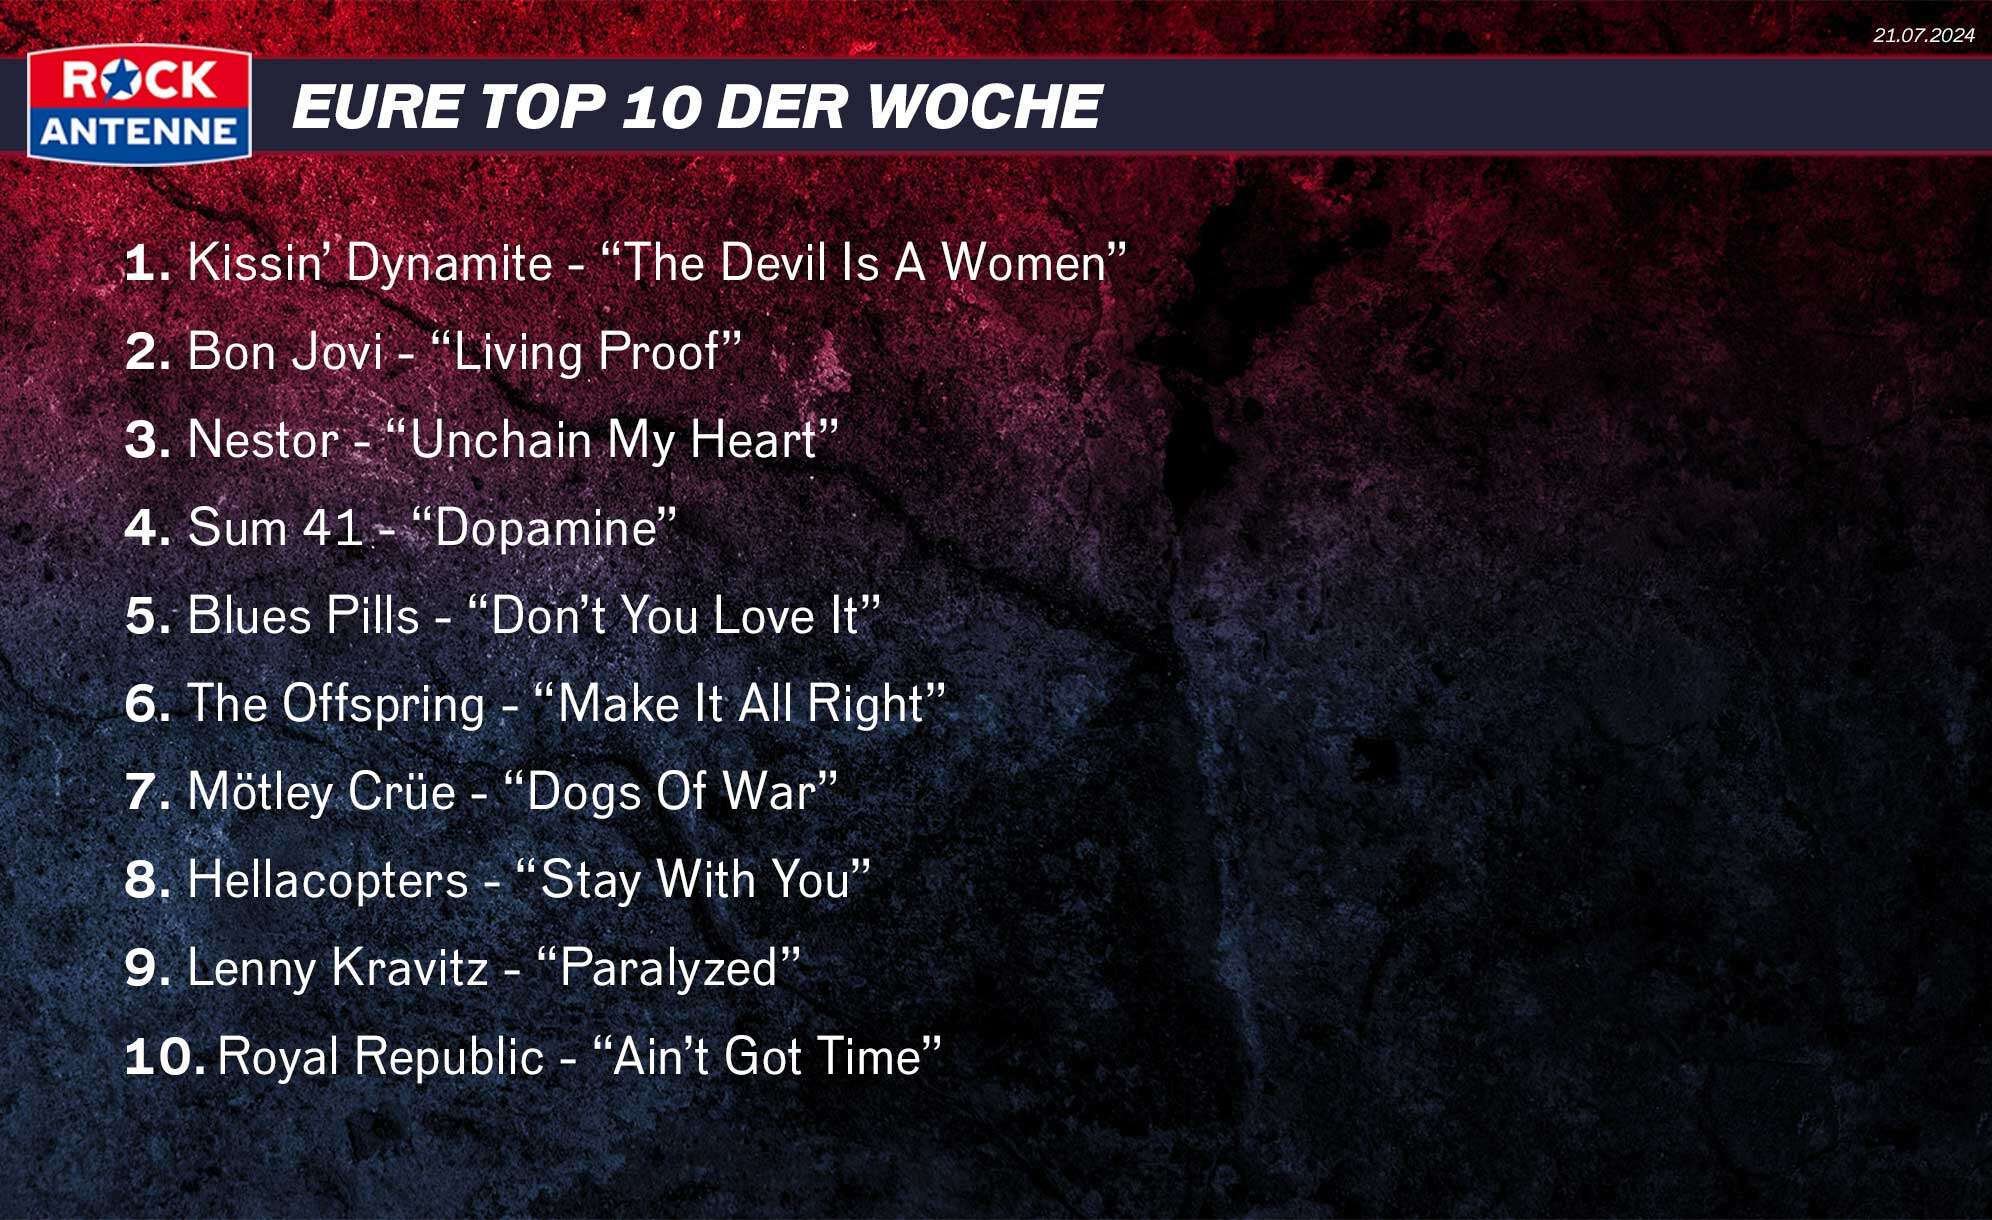 Die Top 10 für die Woche vom 21.07.2024 lautet: 1. Kissin’ Dynamite - “The Devil Is A Women” 2. Bon Jovi - “Living Proof” 3. Nestor - “Unchain My Heart” 4. Sum 41 - “Dopamine” 5. Blues Pills - “Don’t You Love It” 6. The Offspring - “Make It All Right” 7. Mötley Crüe - “Dogs Of War” 8. Hellacopters - “Stay With You” 9. Lenny Kravitz - “Paralyzed” 10. Royal Republic - “Ain’t Got Time”